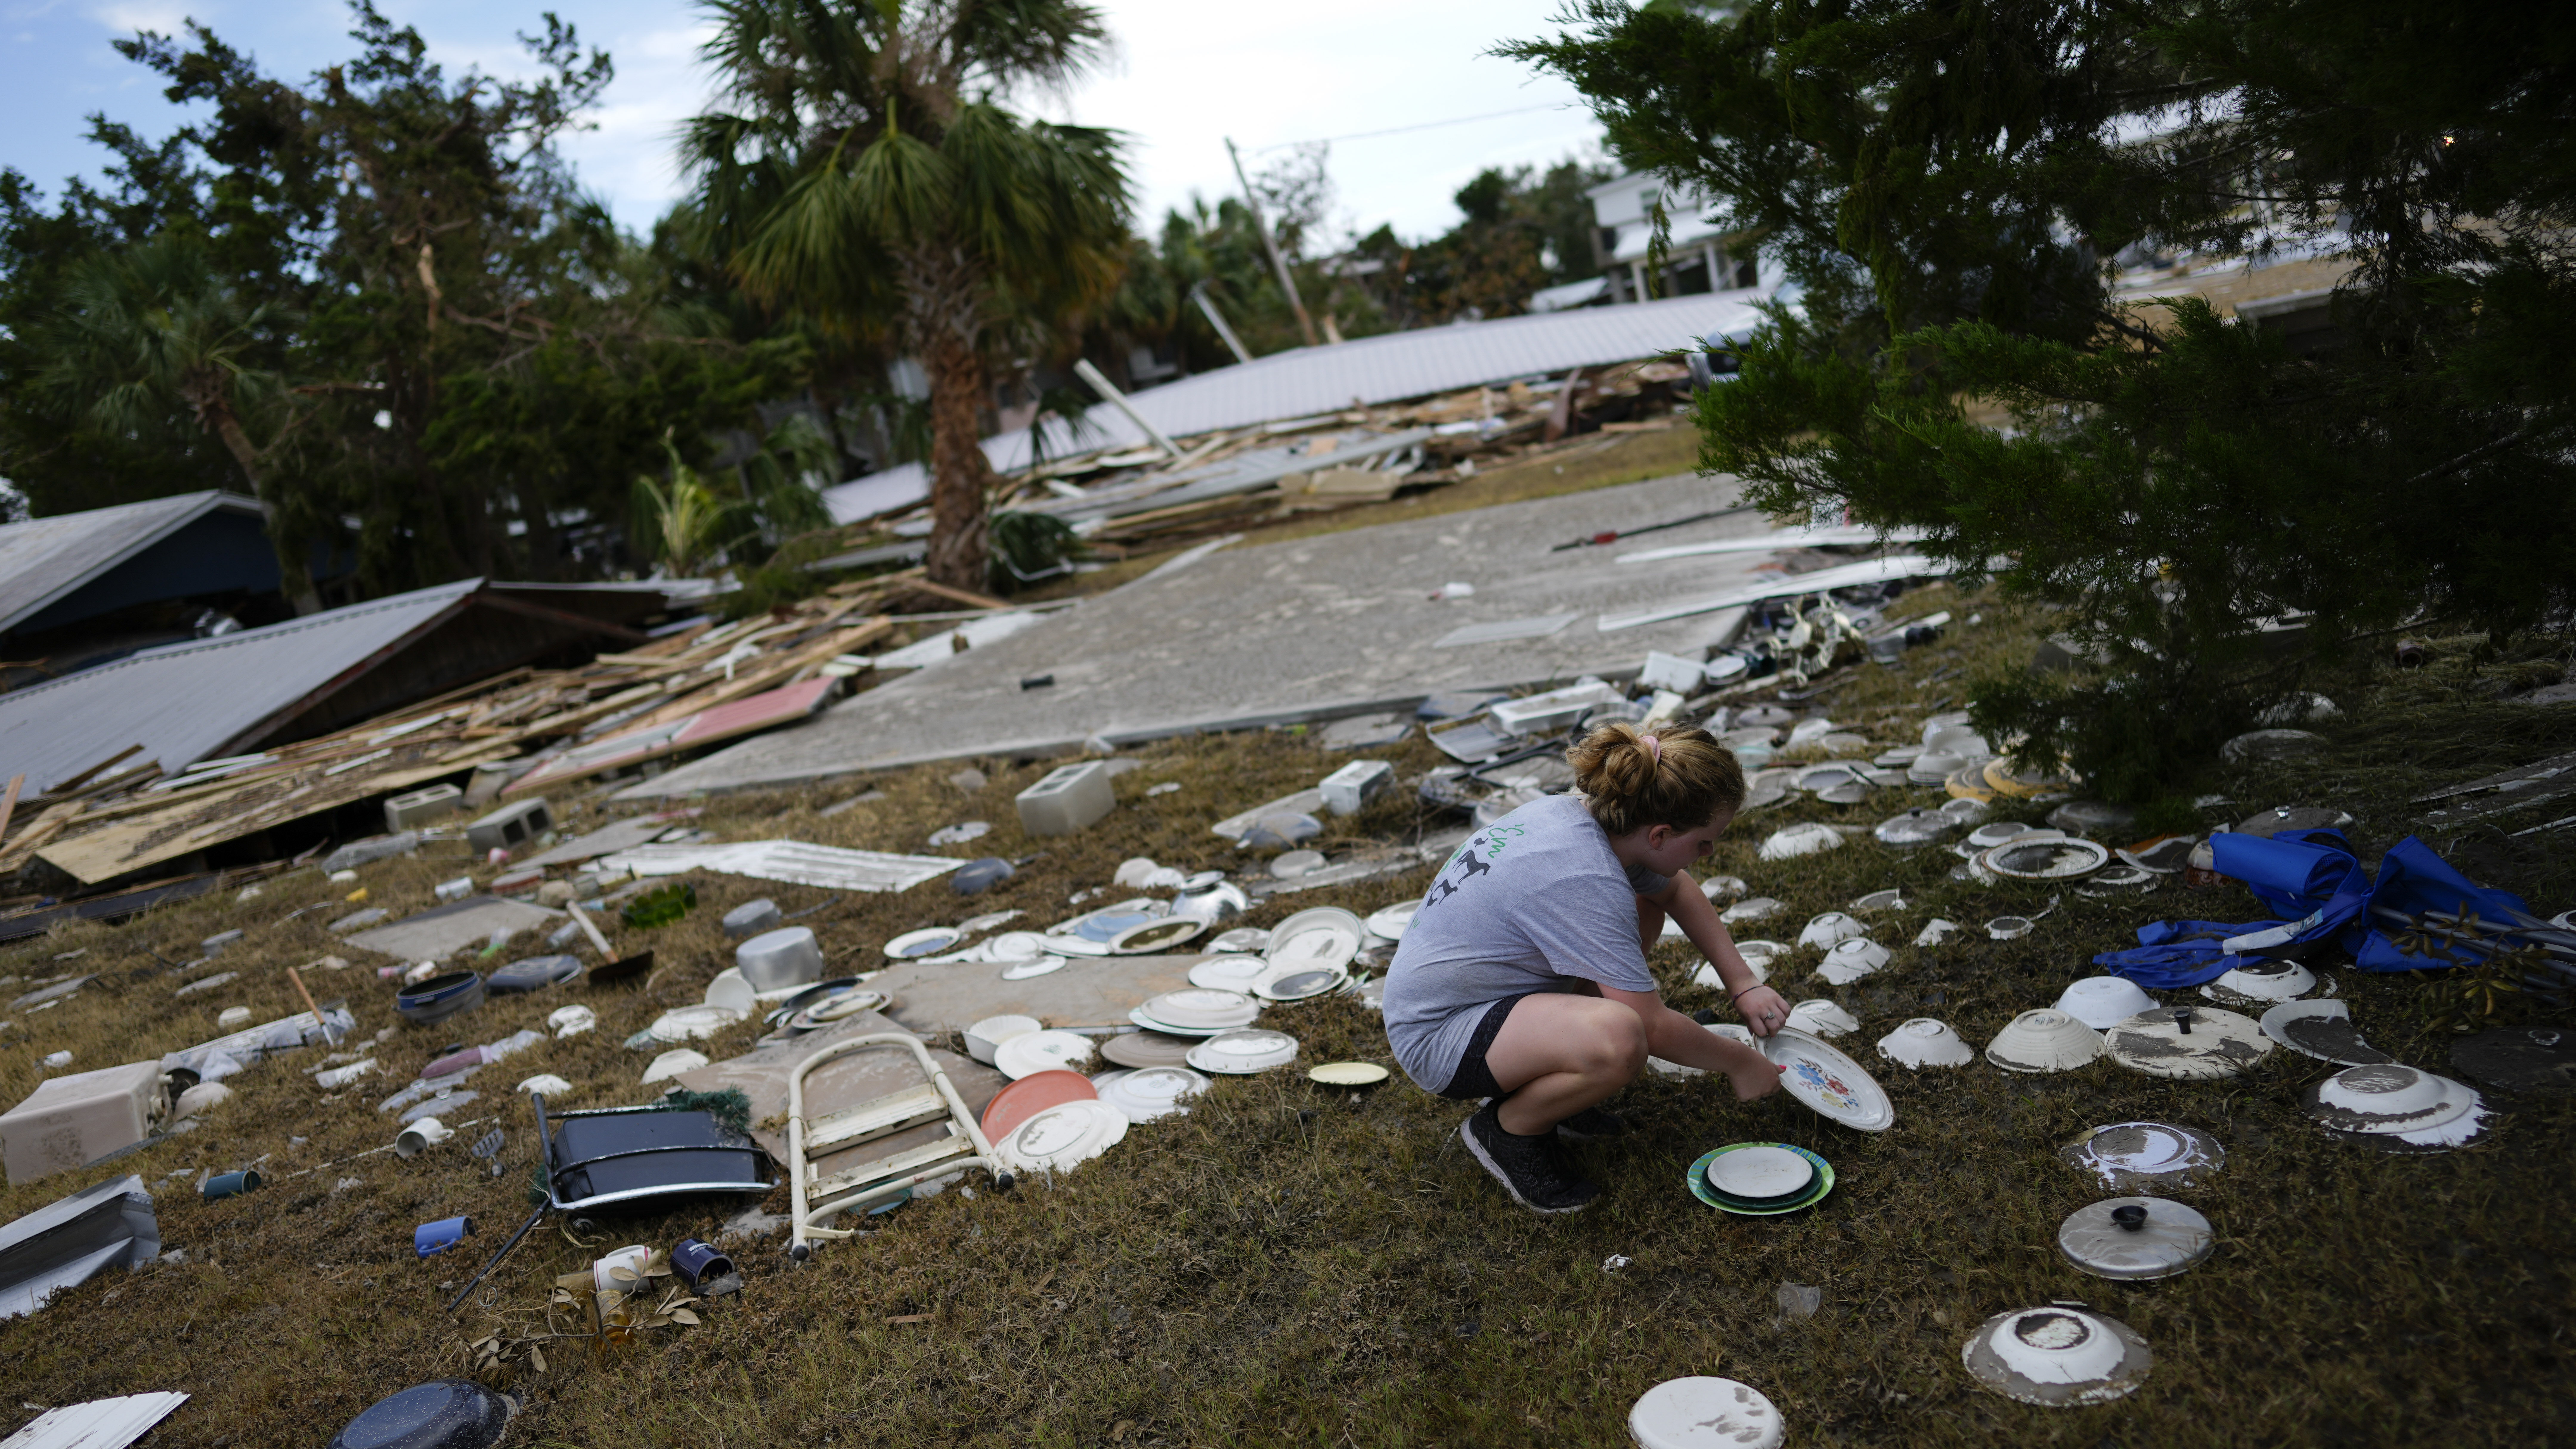 HORSESHOE BEACH, Fla. (AP) — Two people were charged with looting a home damaged by Hurricane Id...